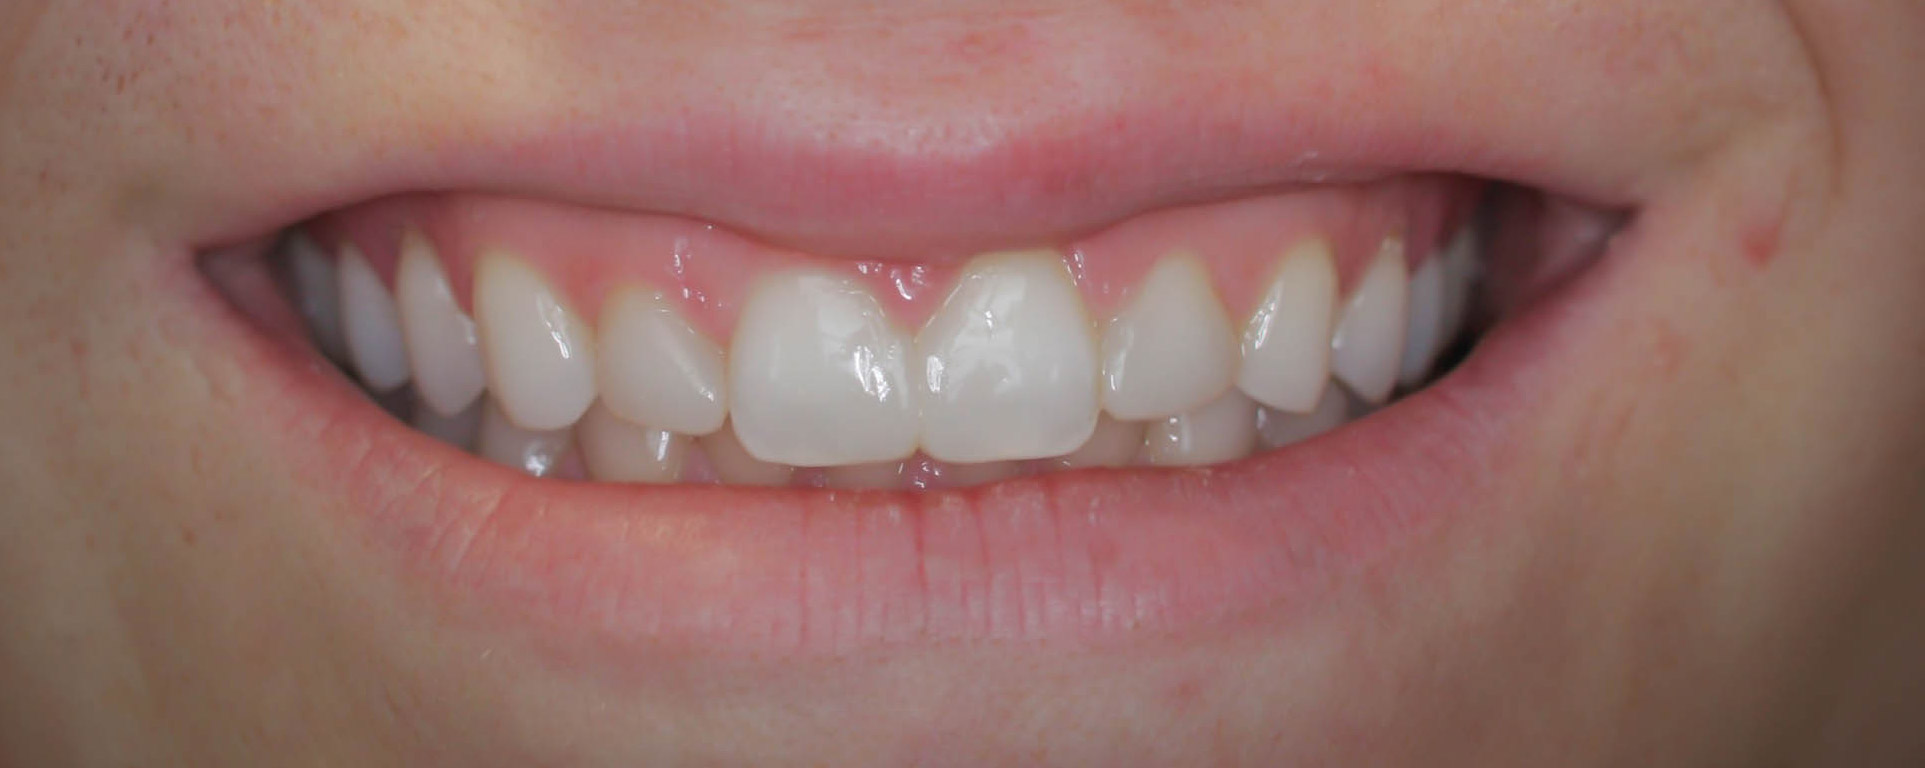 Esthetic bonding to fix small chips and gaps -- the After picture